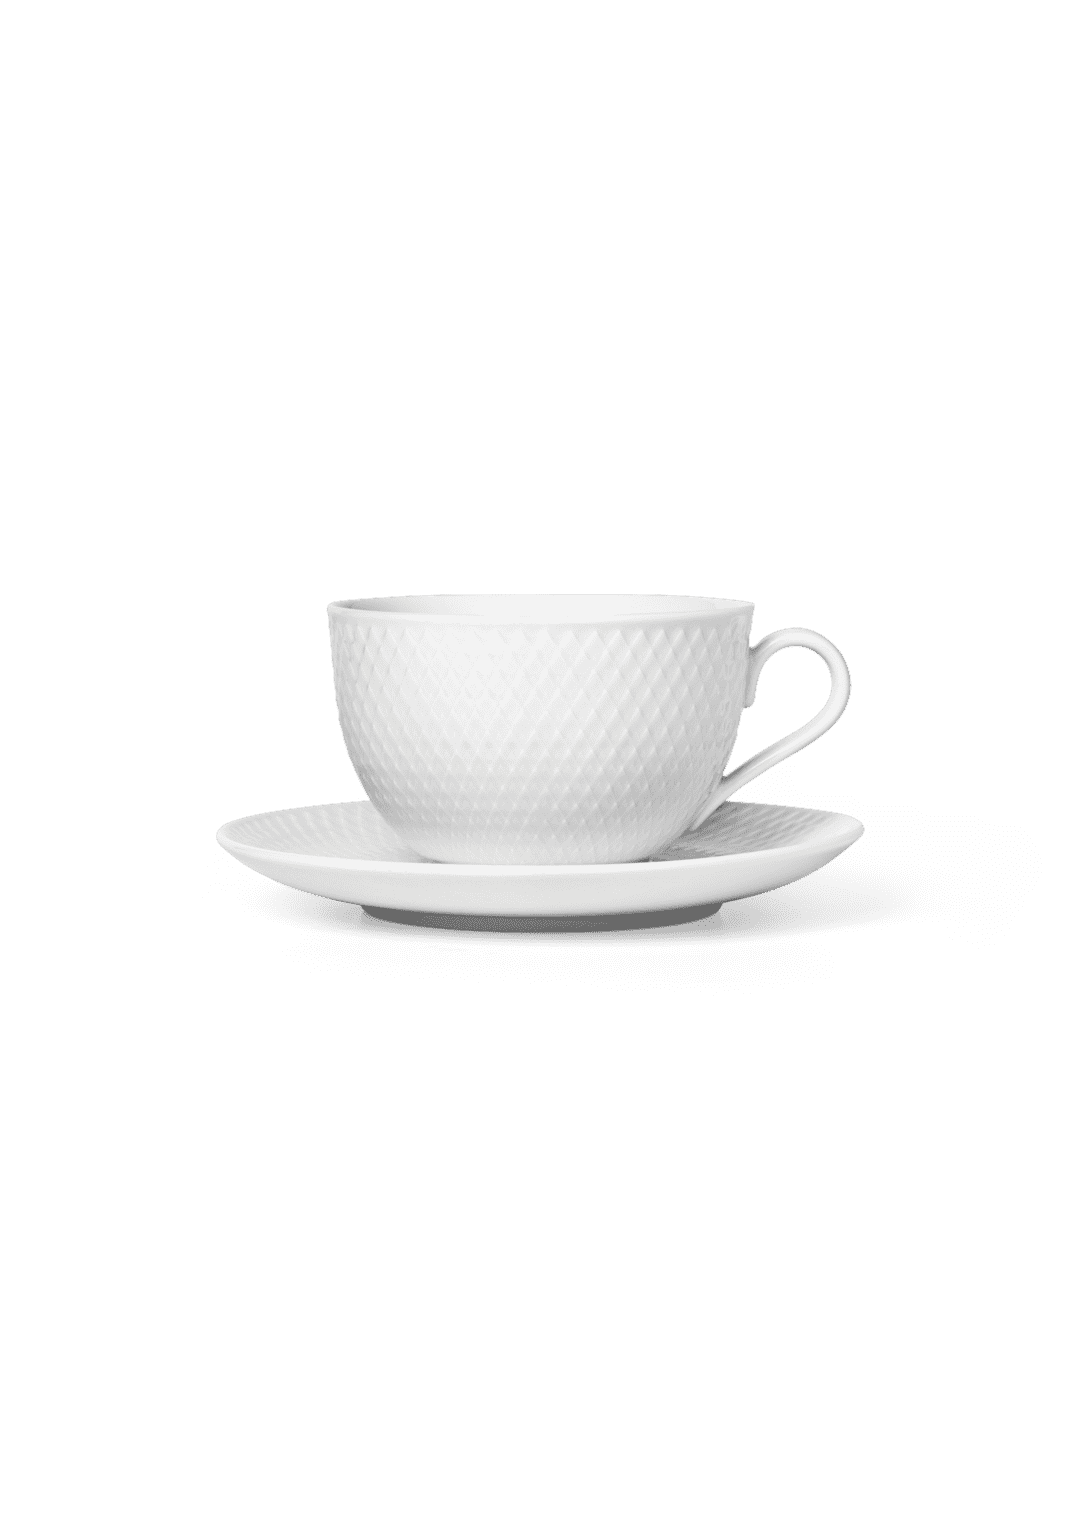 Lyngby Porcelaen RHOMBE Tea Cup with Saucer 39cl